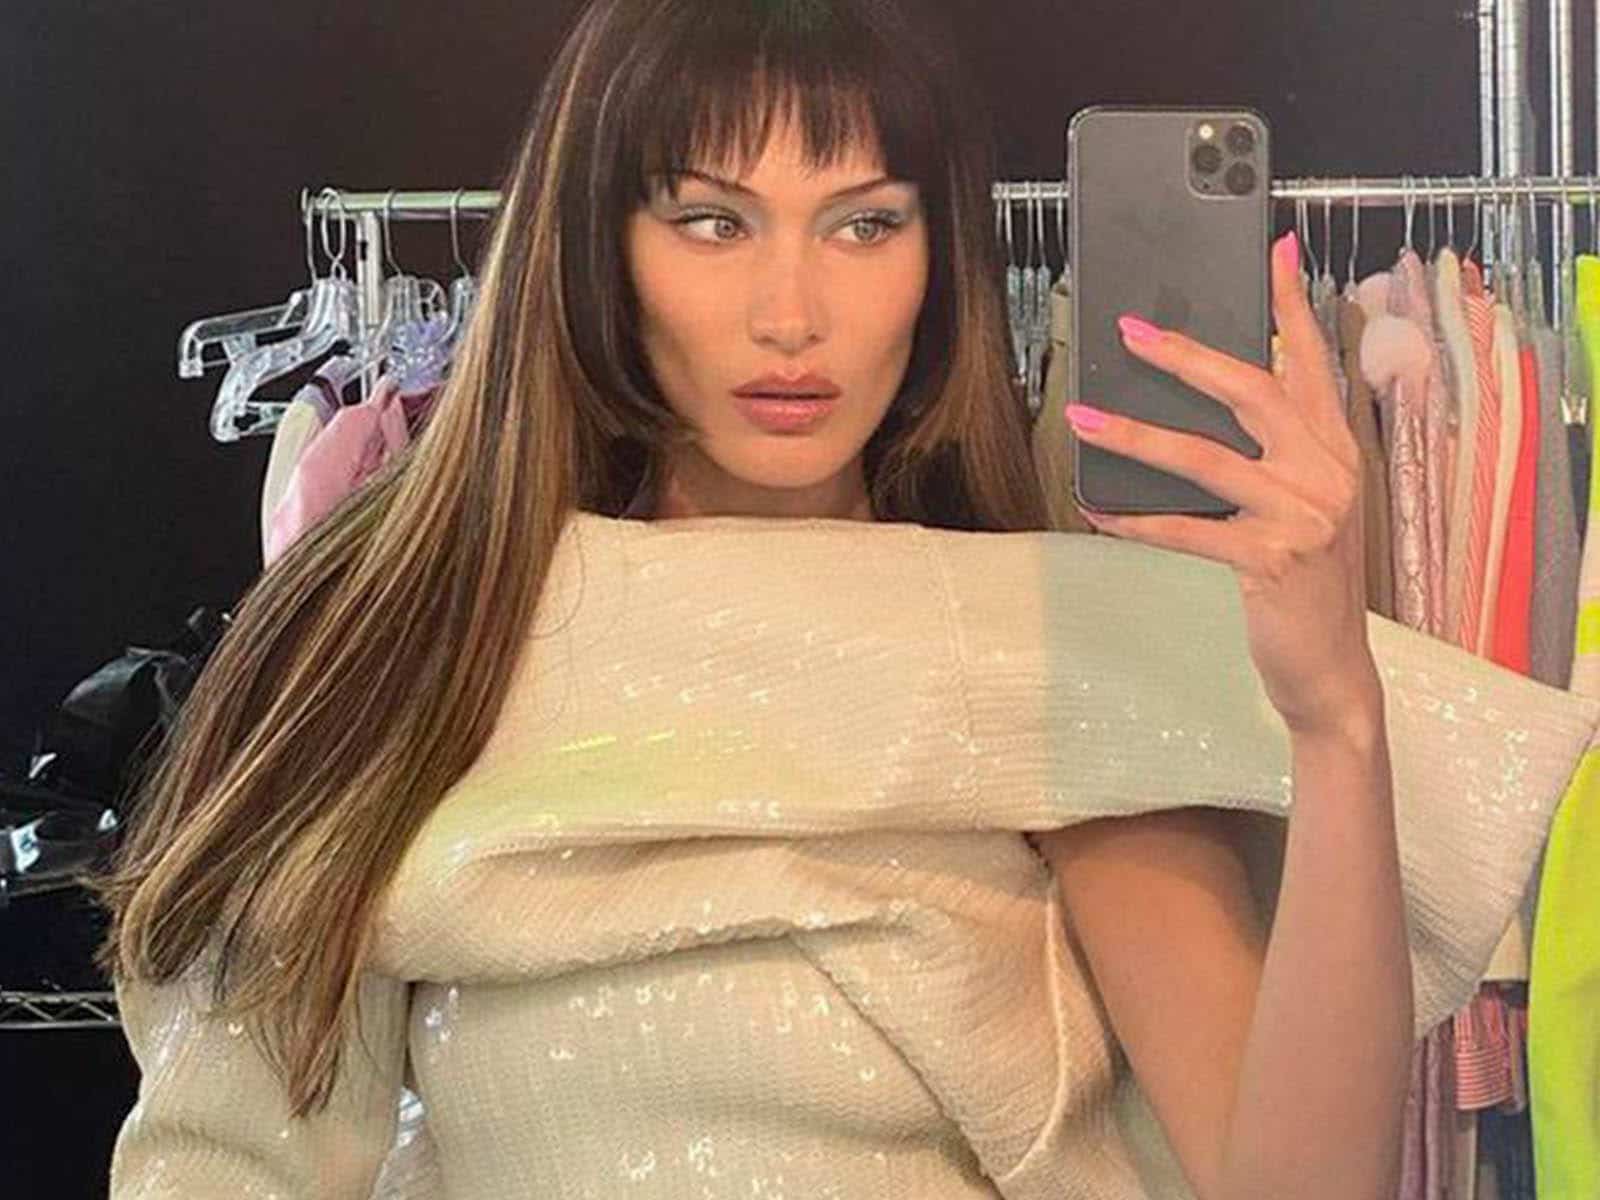 The new eyebrow trend that has Bella Hadid captivated